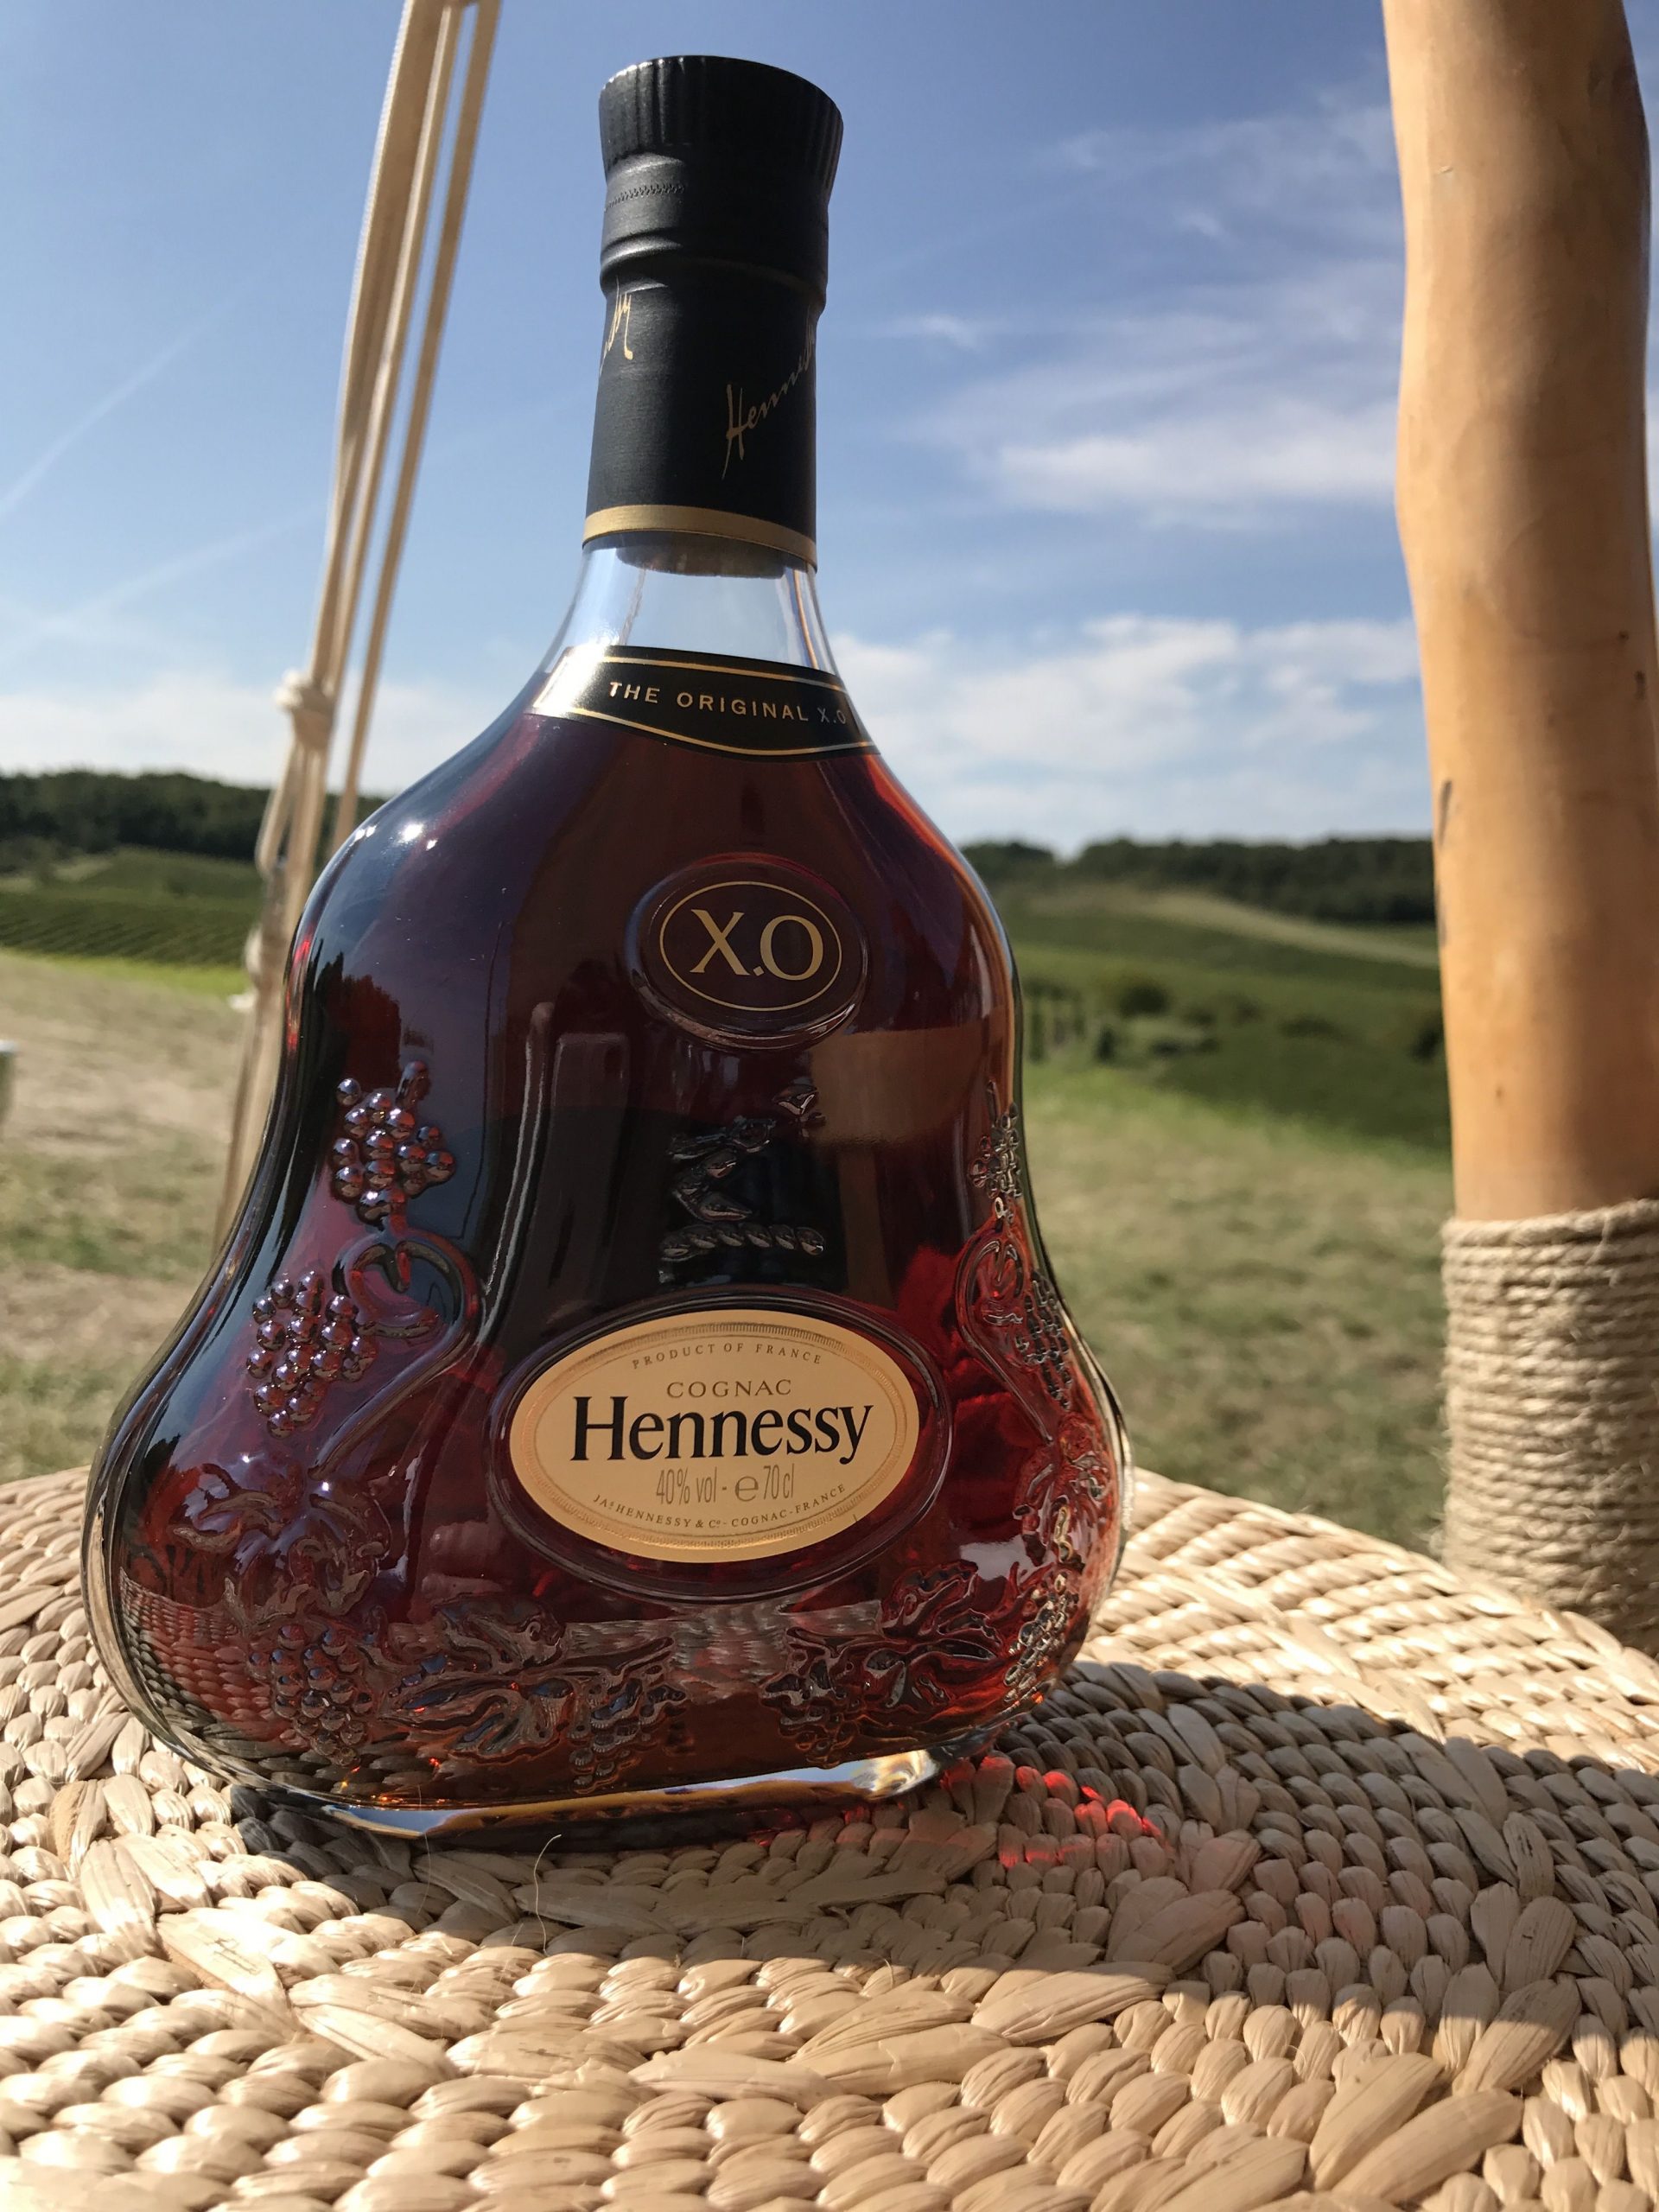 What Does Xo In Cognac Mean